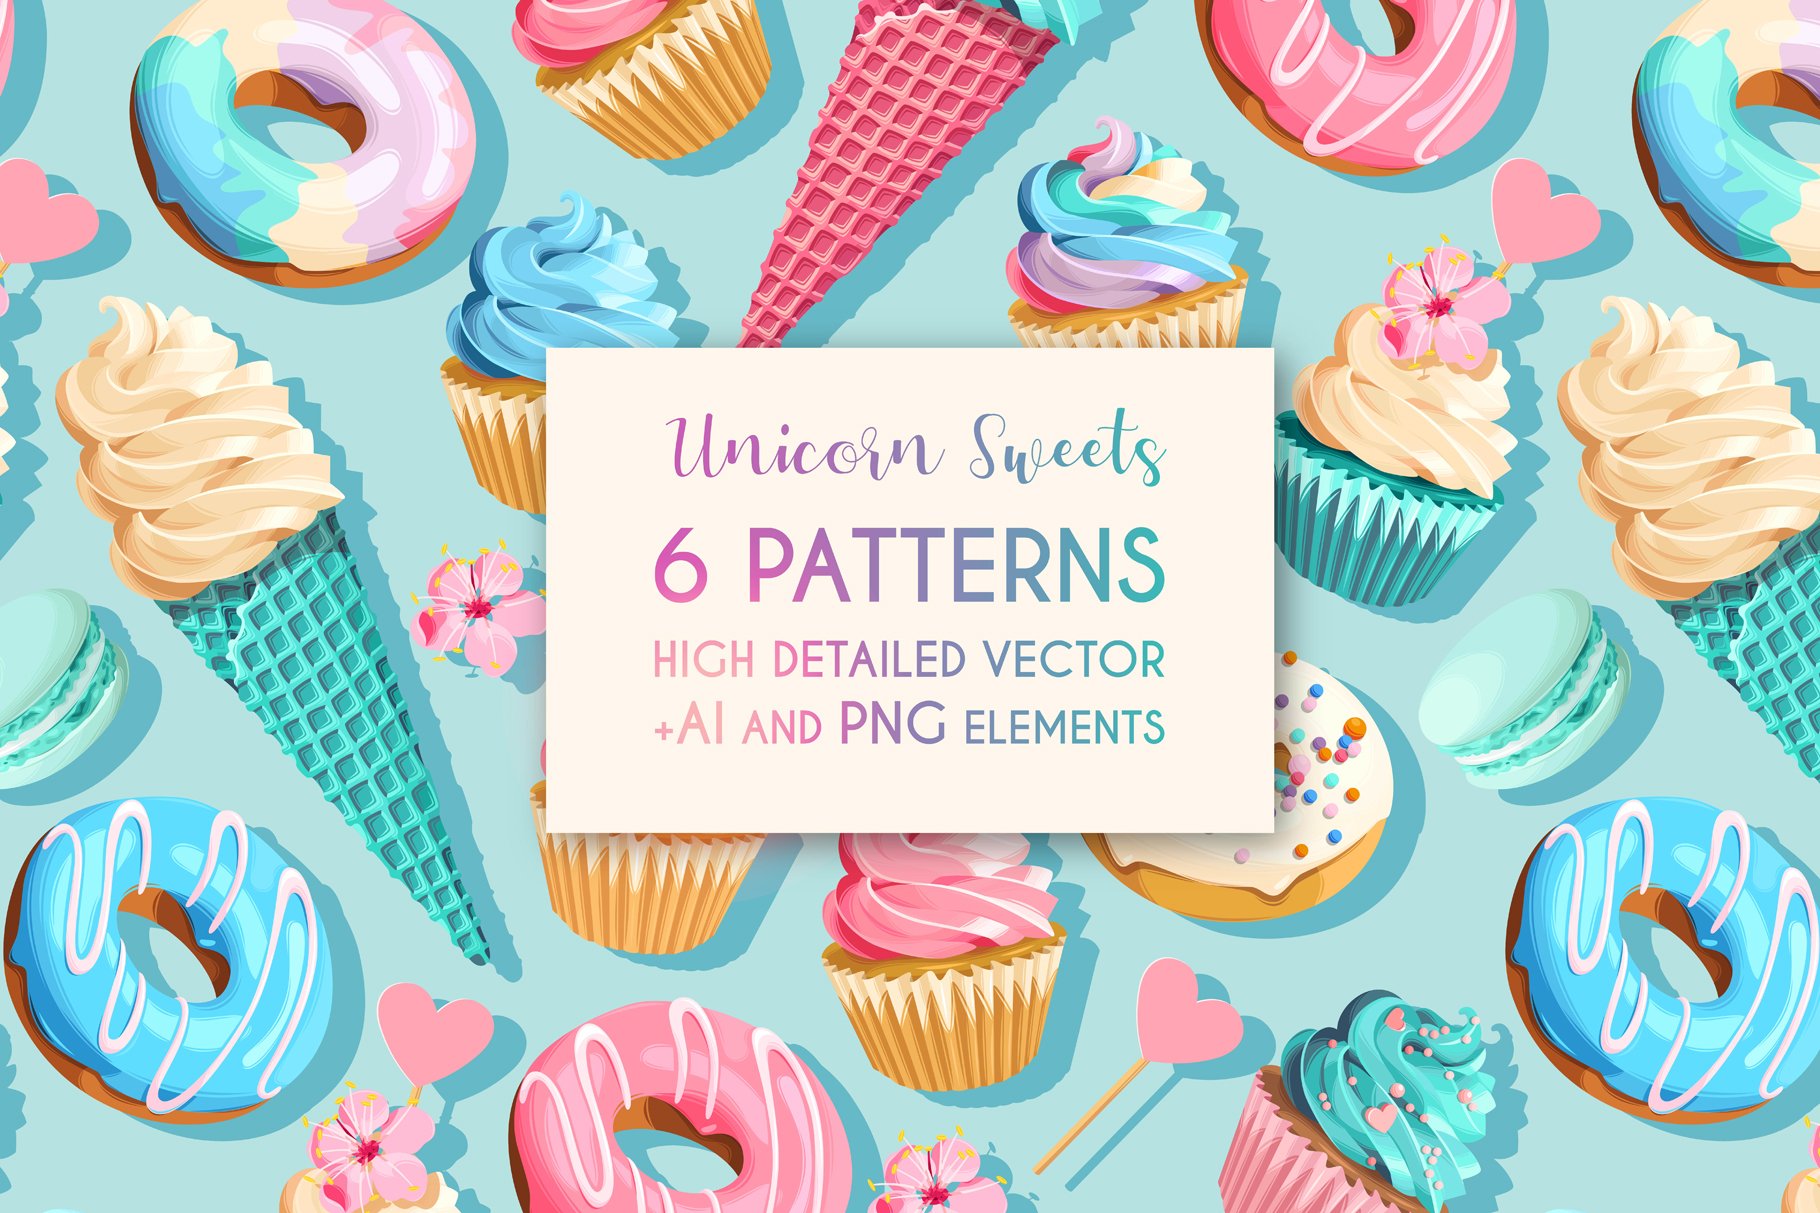 Unicorn Sweets Patterns cover image.